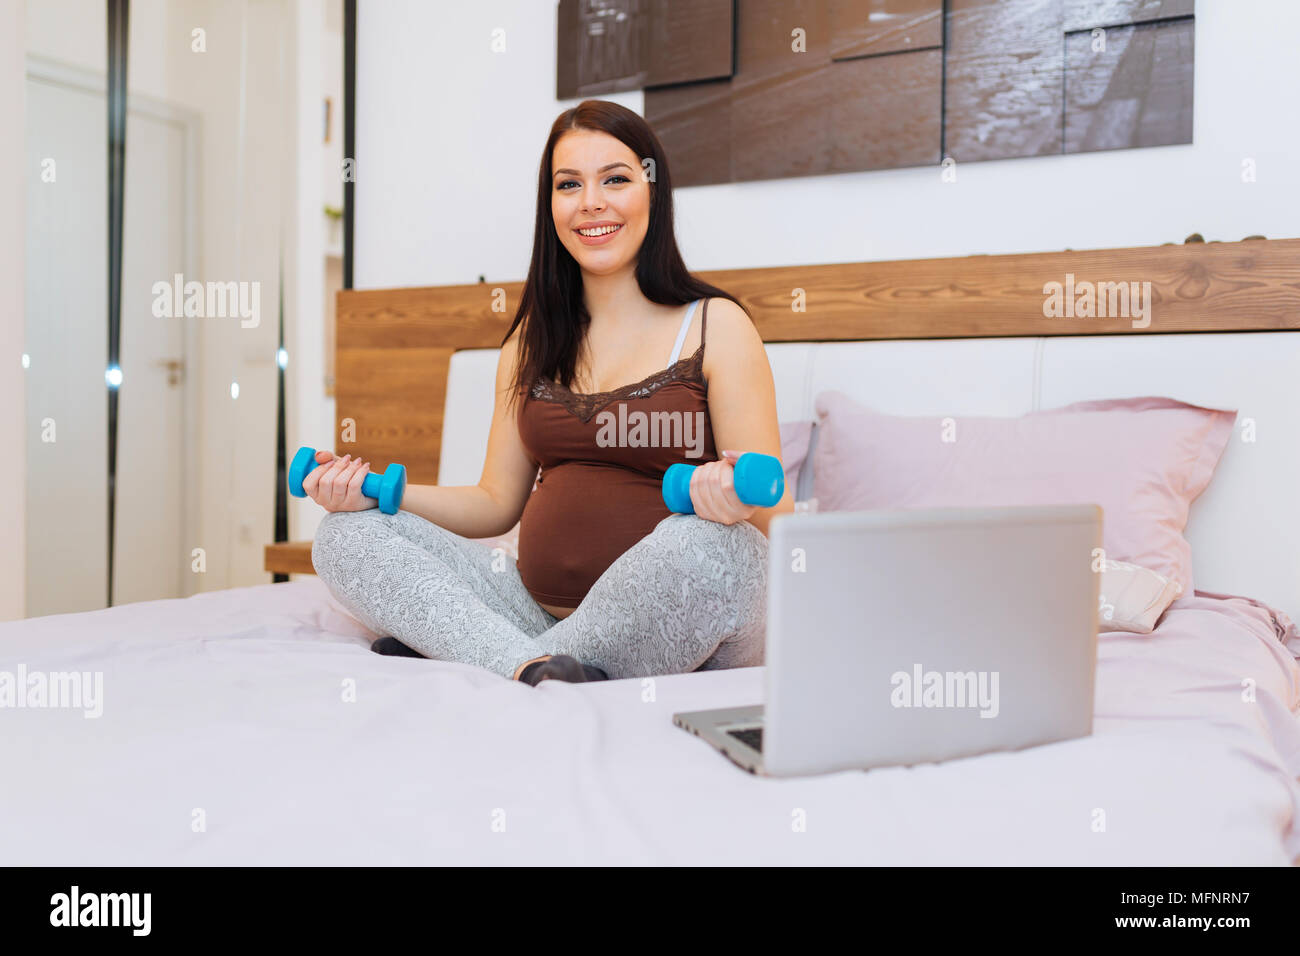 Pregnant woman keeping her body fit Stock Photo